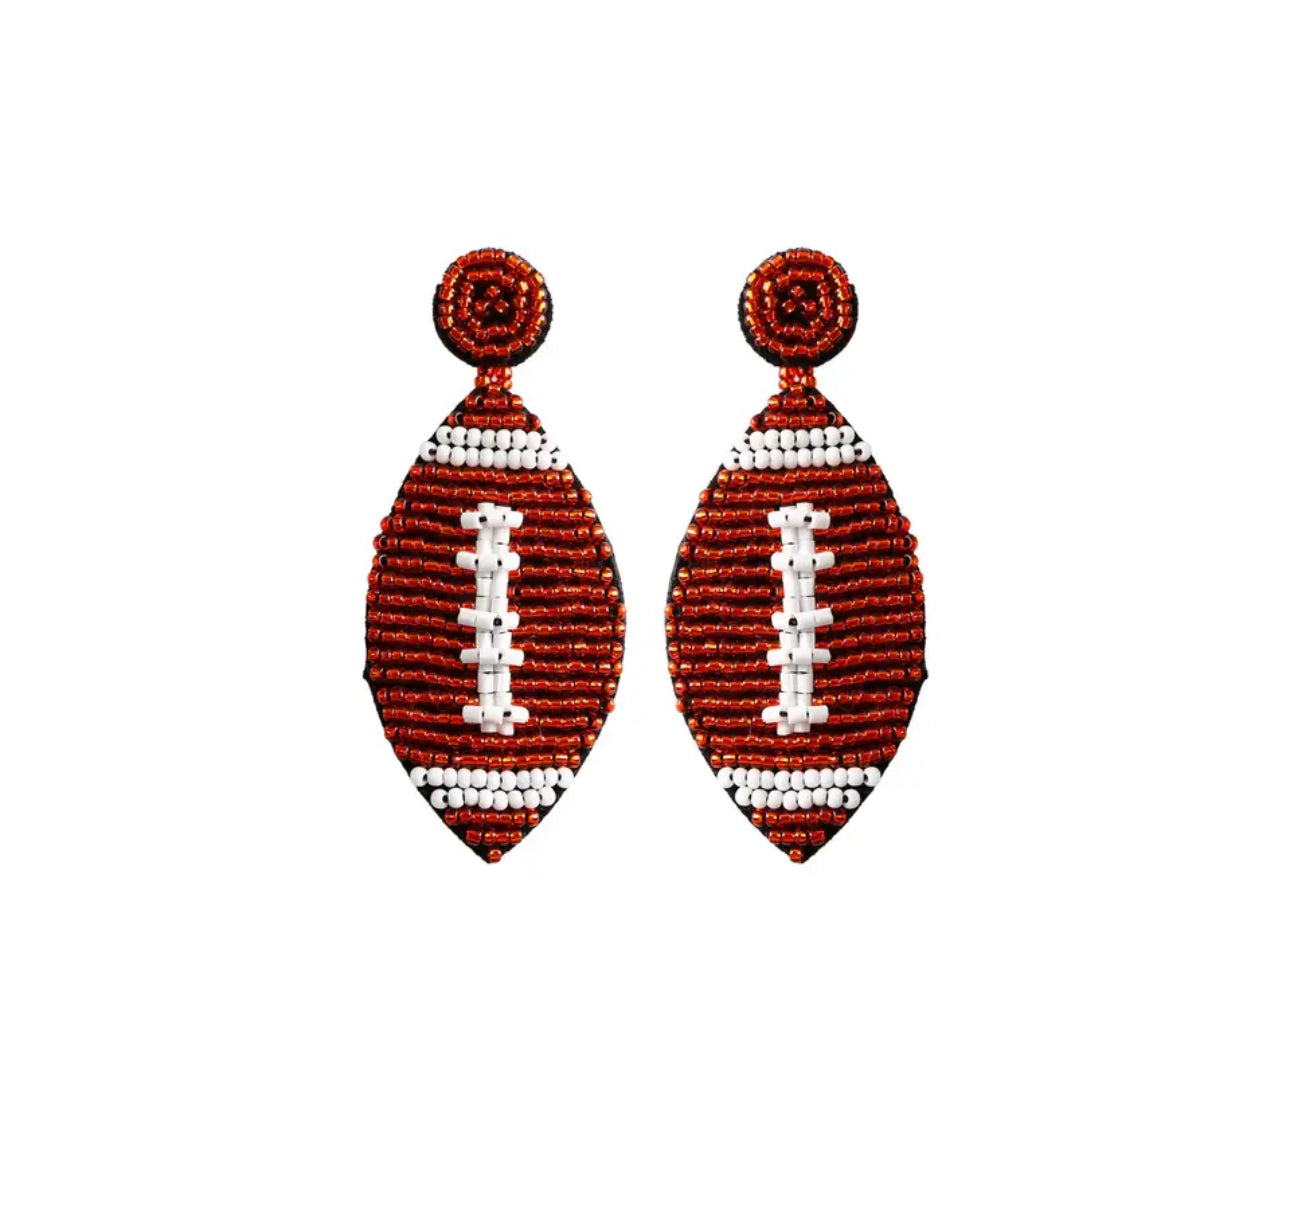 Red and white Football beaded earrings